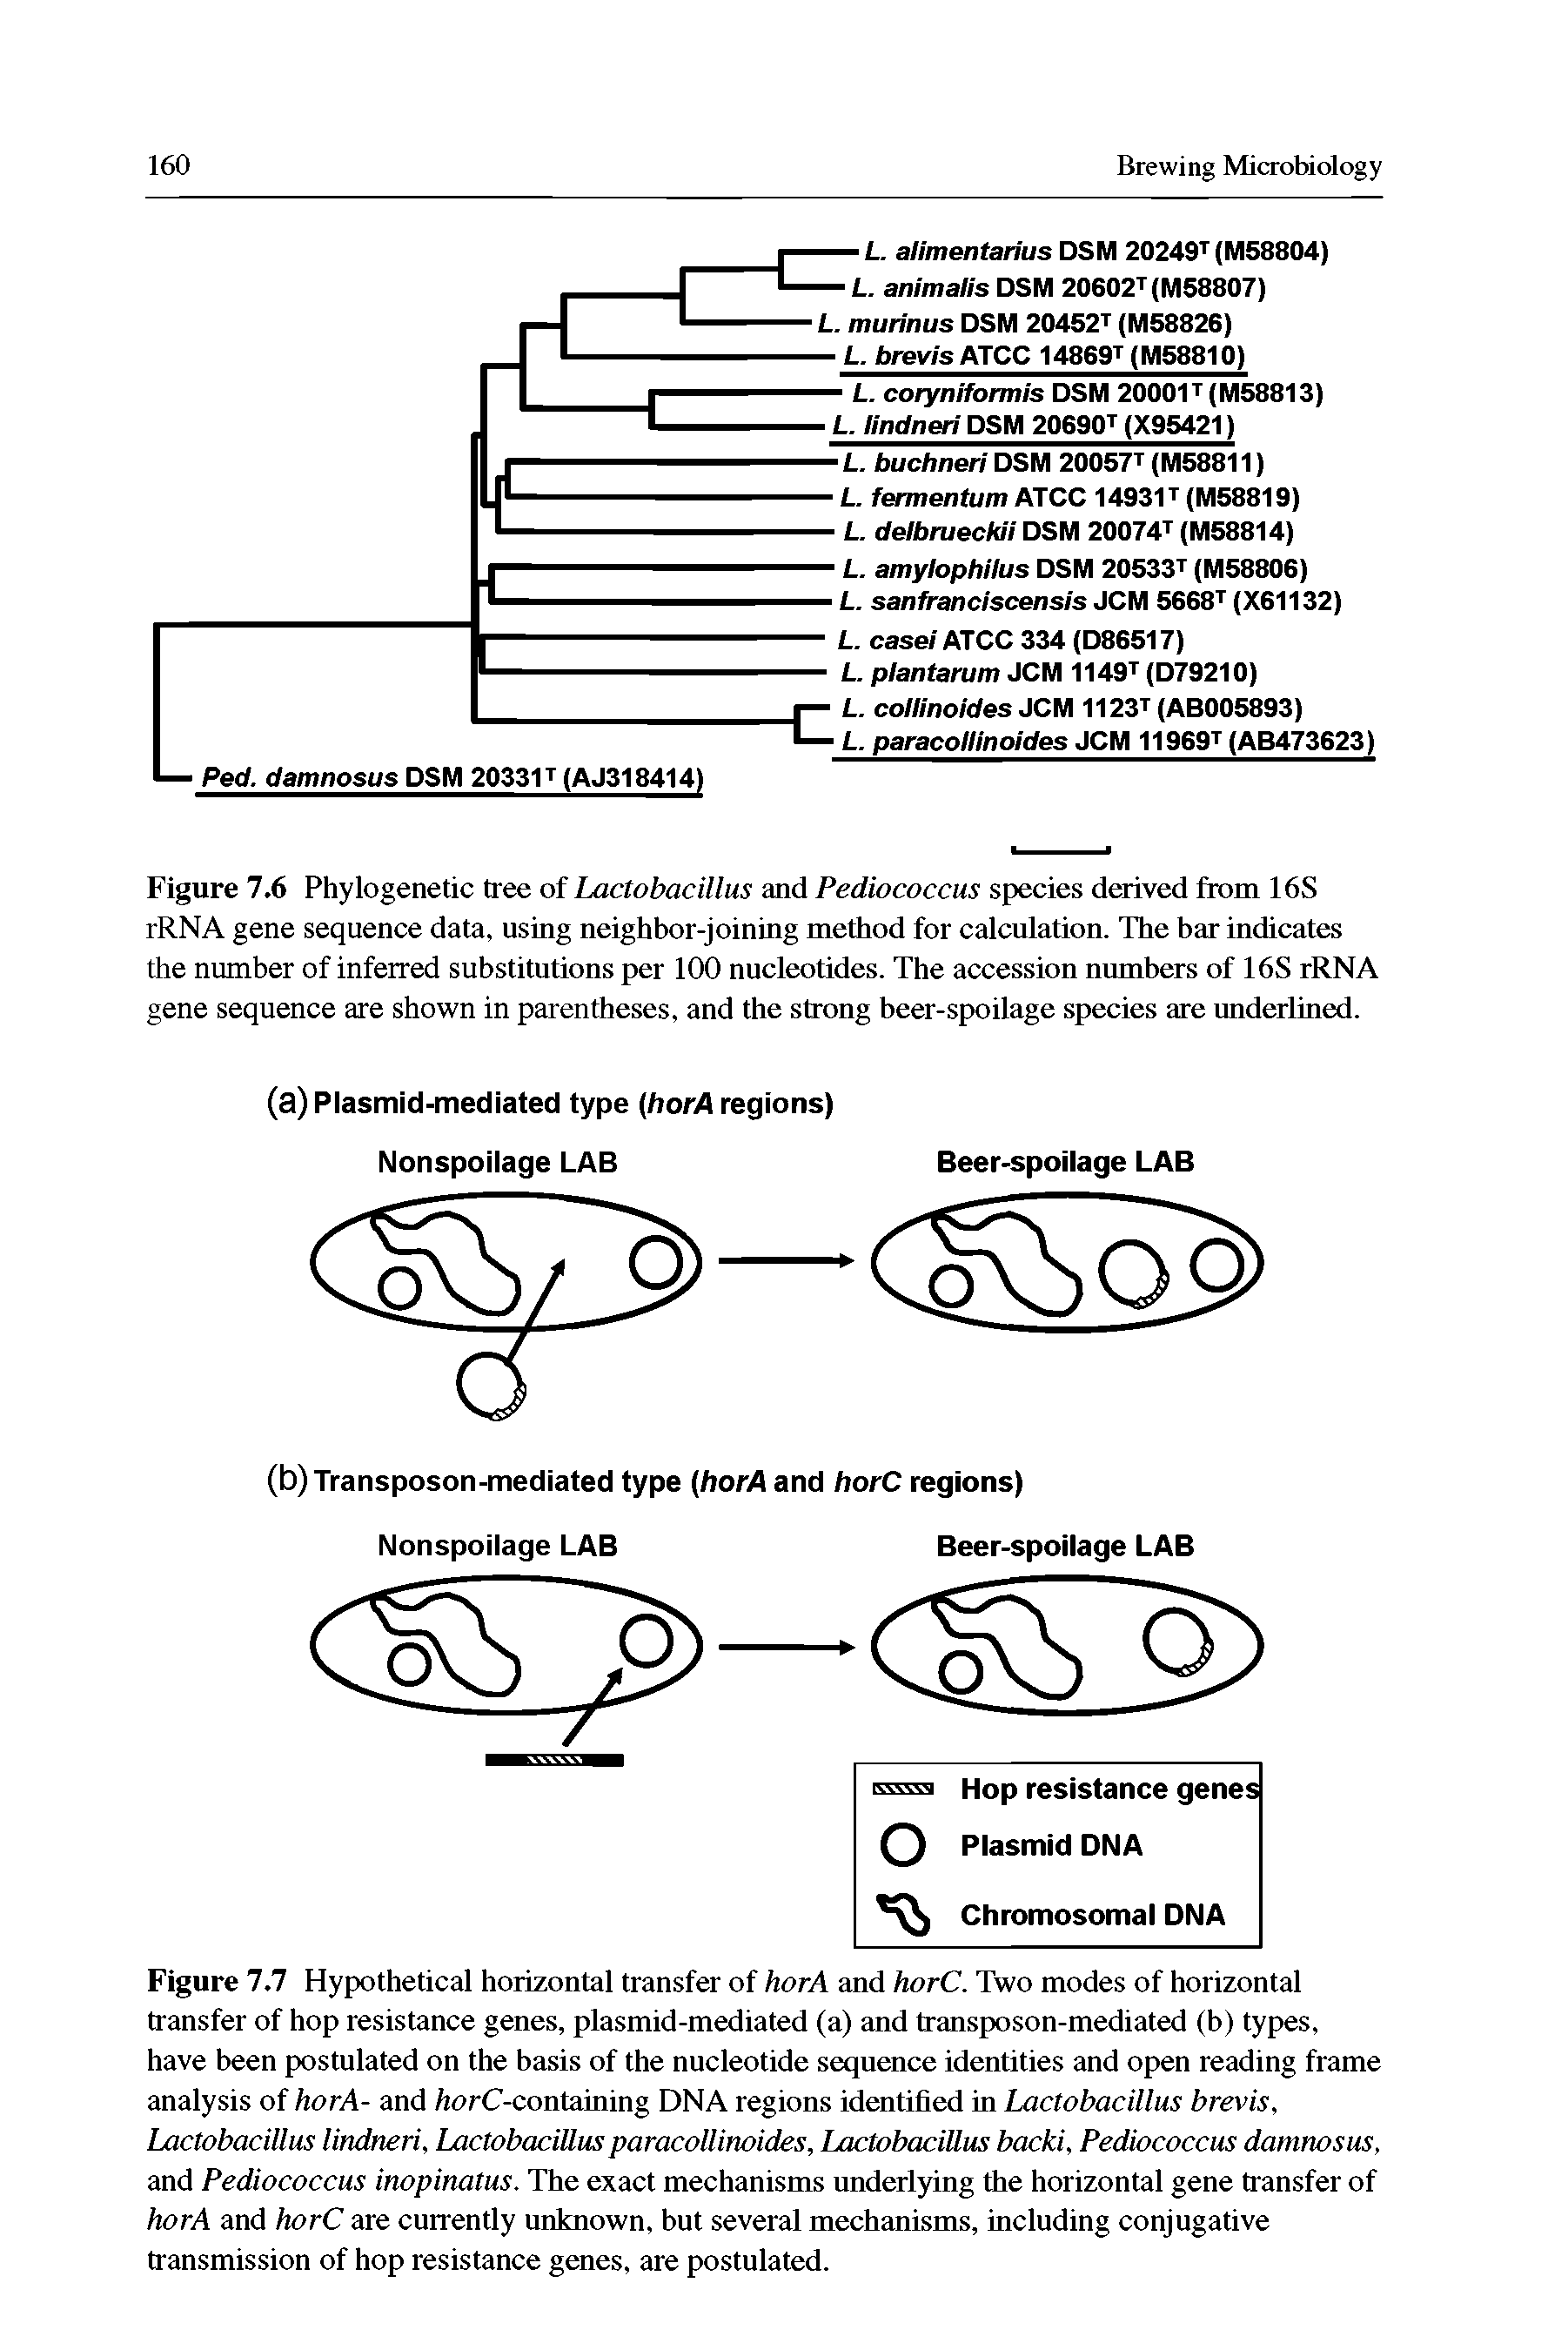 Figure 7.7 Hypothetical horizontal transfer of horA and horC. Two modes of horizontal transfer of hop resistance genes, plasmid-mediated (a) and transposon-mediated (b) types, have been postulated on the basis of the nucleotide sequence identities and open reading frame analysis of horA- and /torC-containing DNA regions identified in Lactobacillus brevis, Lactobacillus lindneri, Lactobacillus paracolllnoides, Lactobacillus backi, Pediococcus damnosus, and Pediococcus inopinatus. The exact mechanisms underlying the horizontal gene transfer of horA and horC are currently unknown, but several mechanisms, including conjugative transmission of hop resistance genes, are postulated.